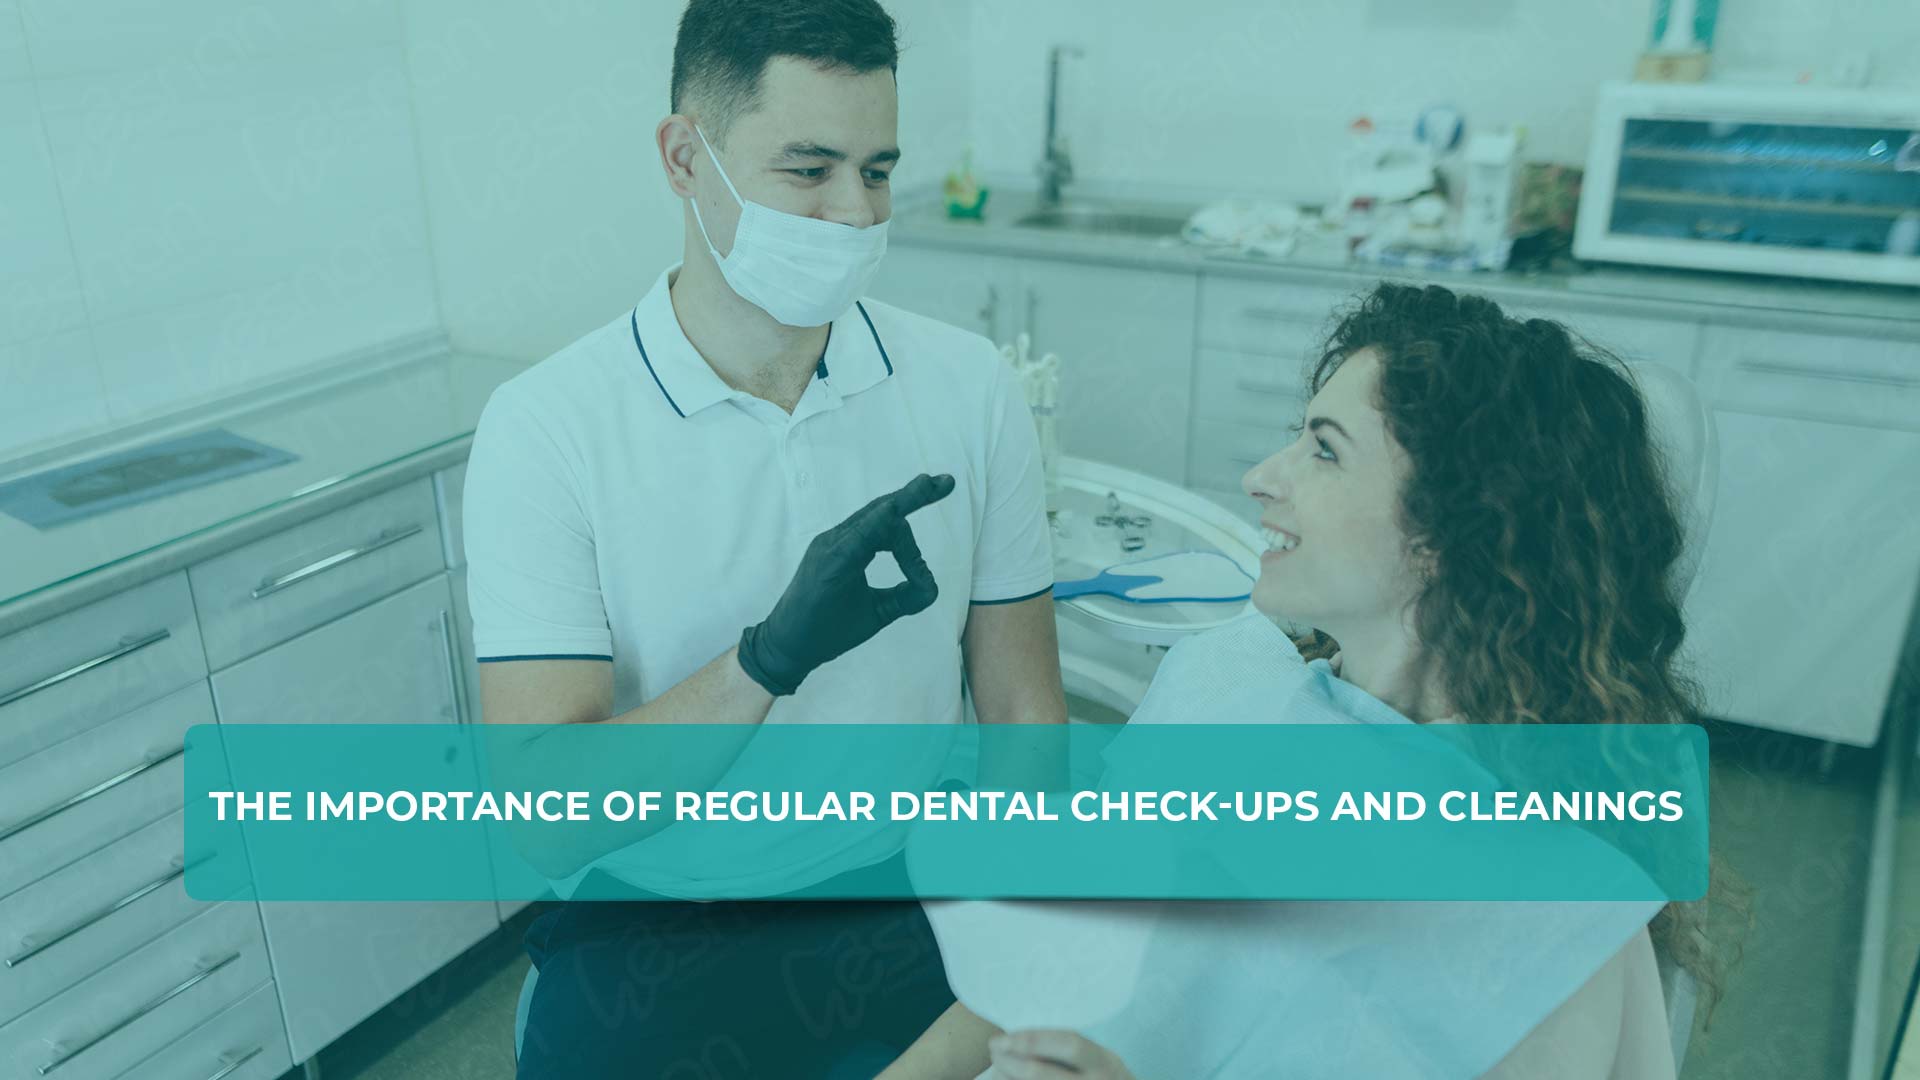 Dental check-ups in Istanbul offer comprehensive care, often including X-rays for a thorough evaluation of your oral health, all at competitive prices.